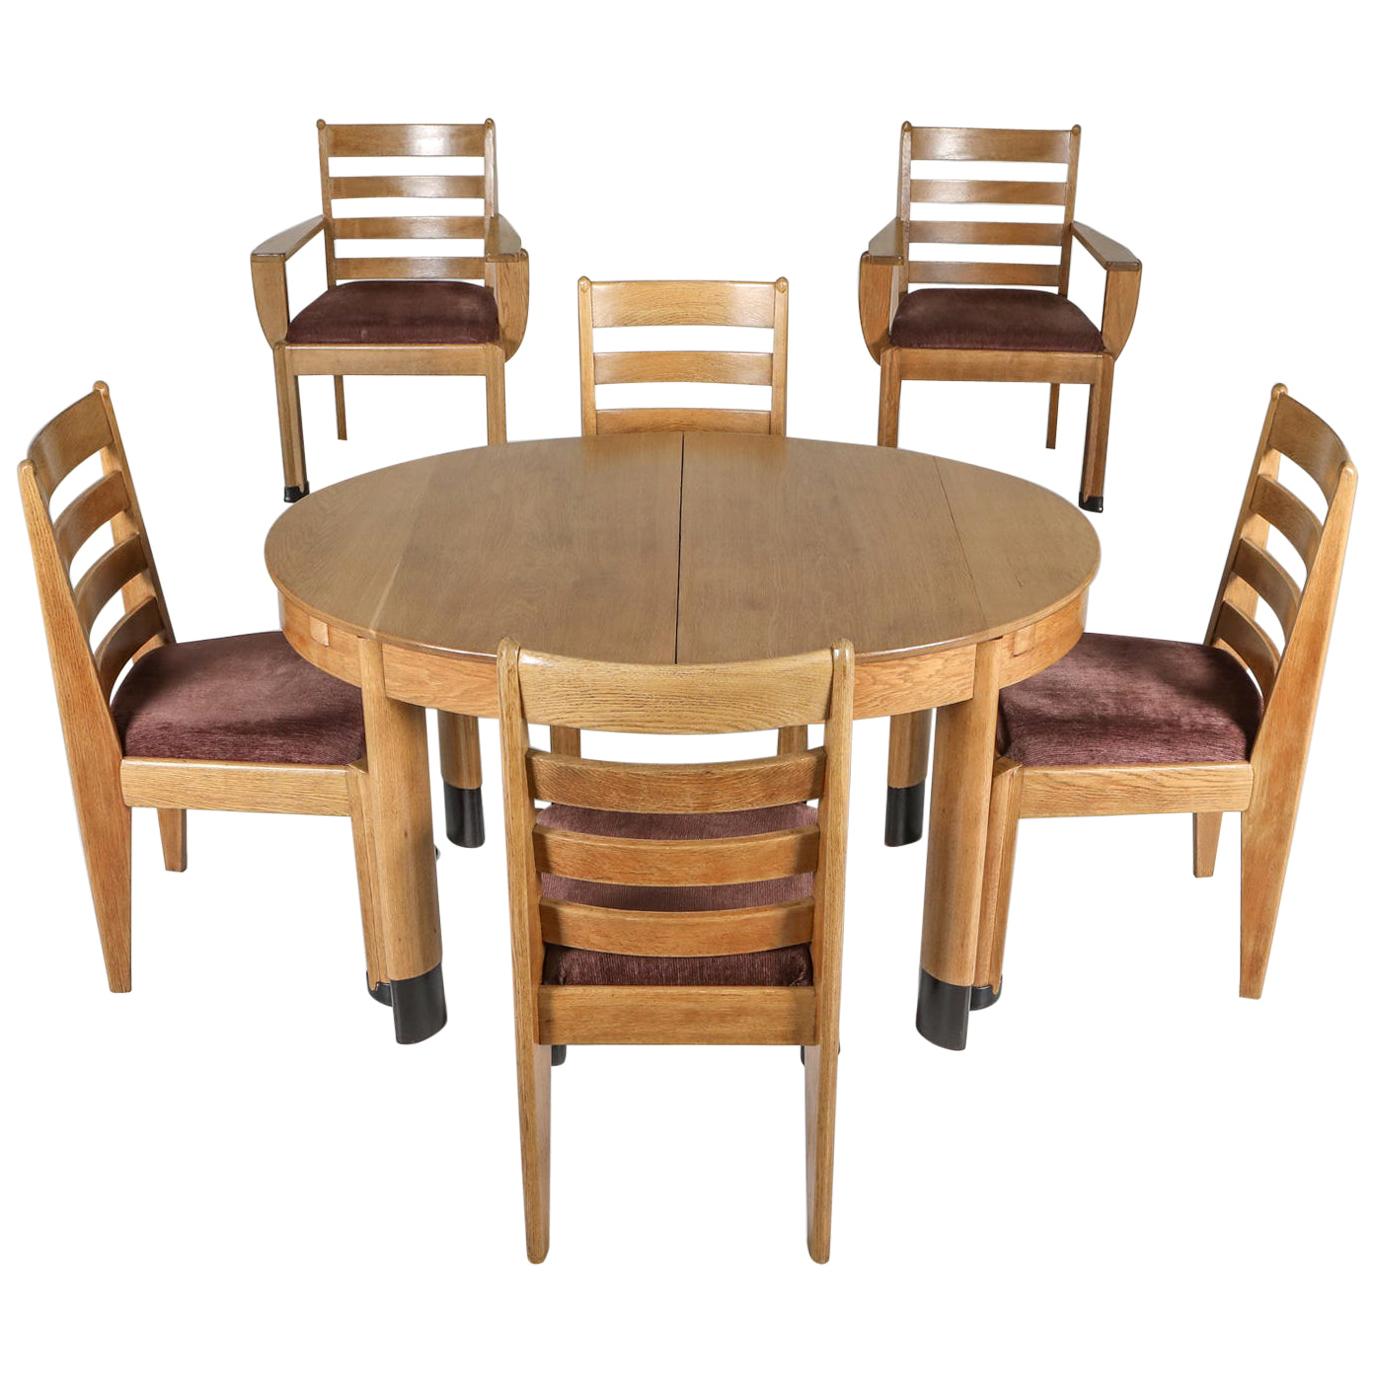 Rationalist Oval Dining Set in Oak, Holland, 1920s